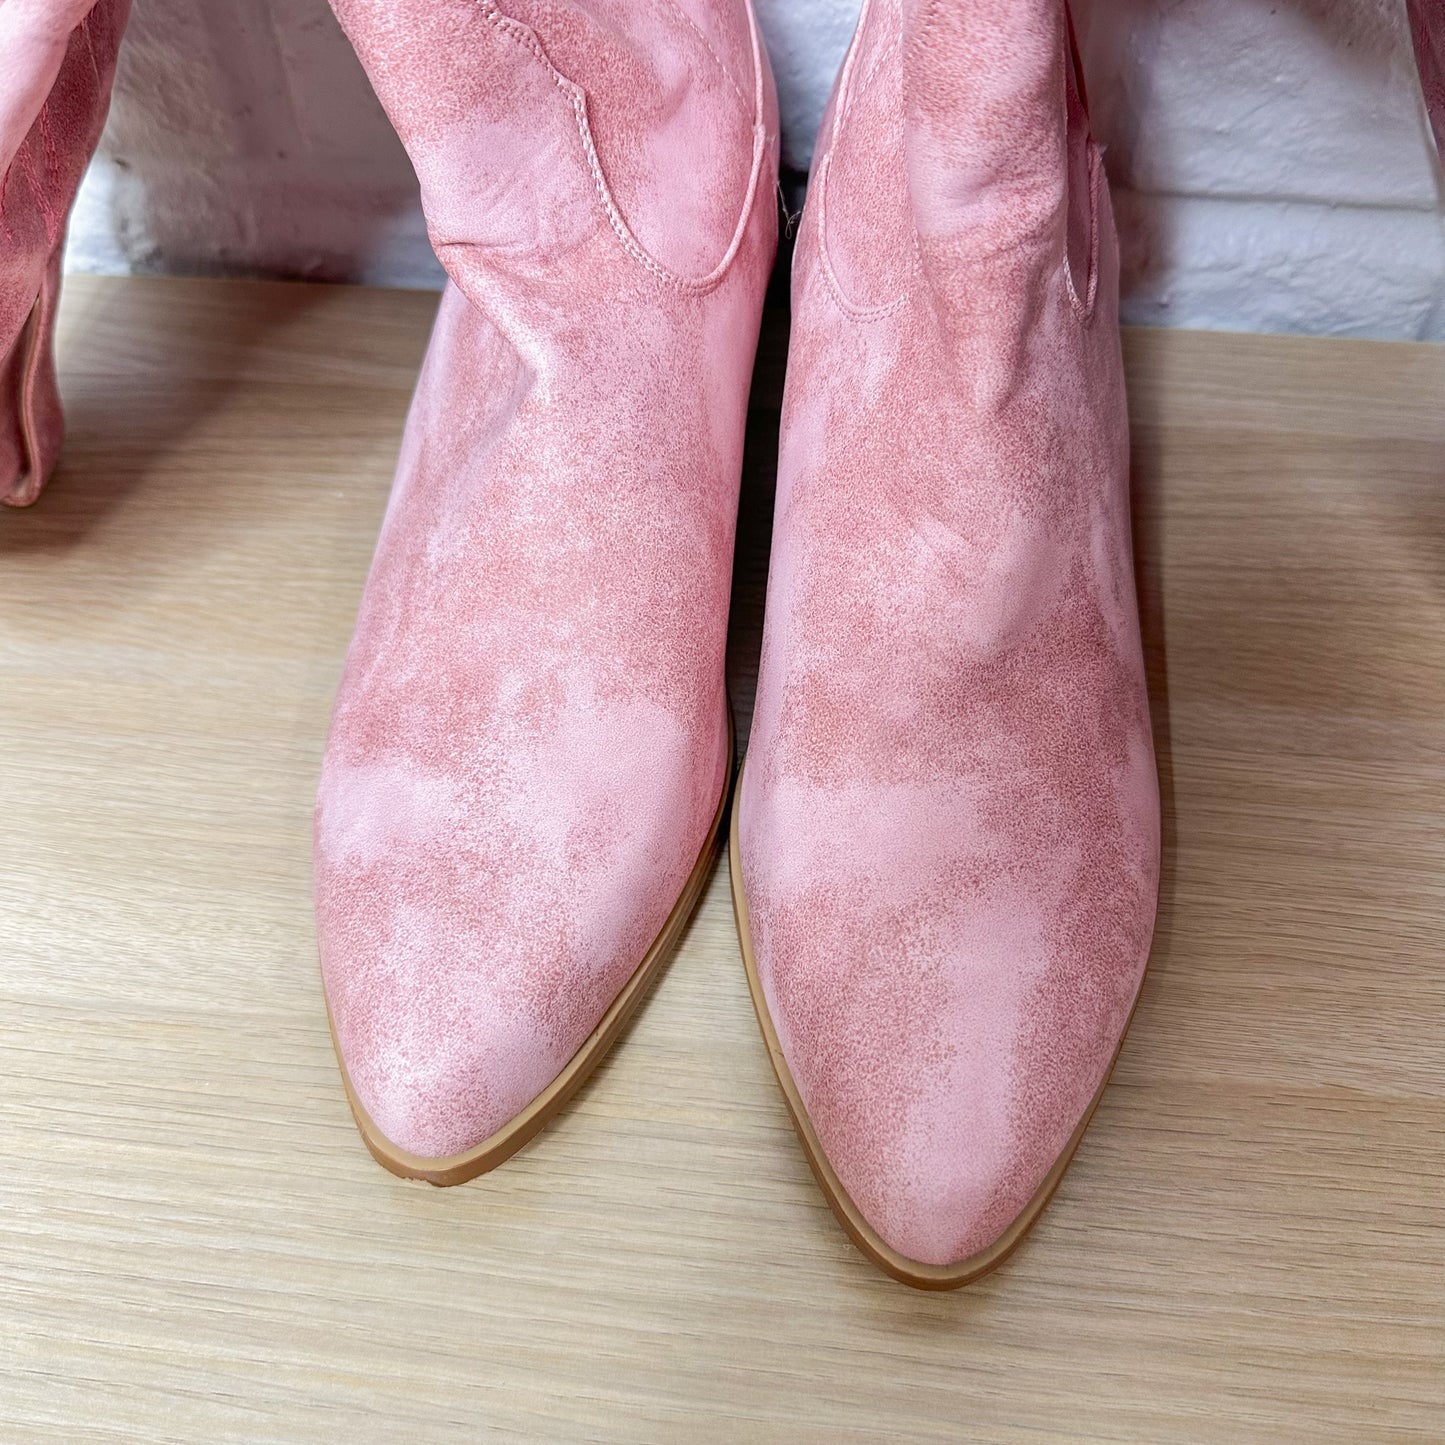 New Pink Pointed Toe Knee High Cowboy Boots Size EU 42 / US 11